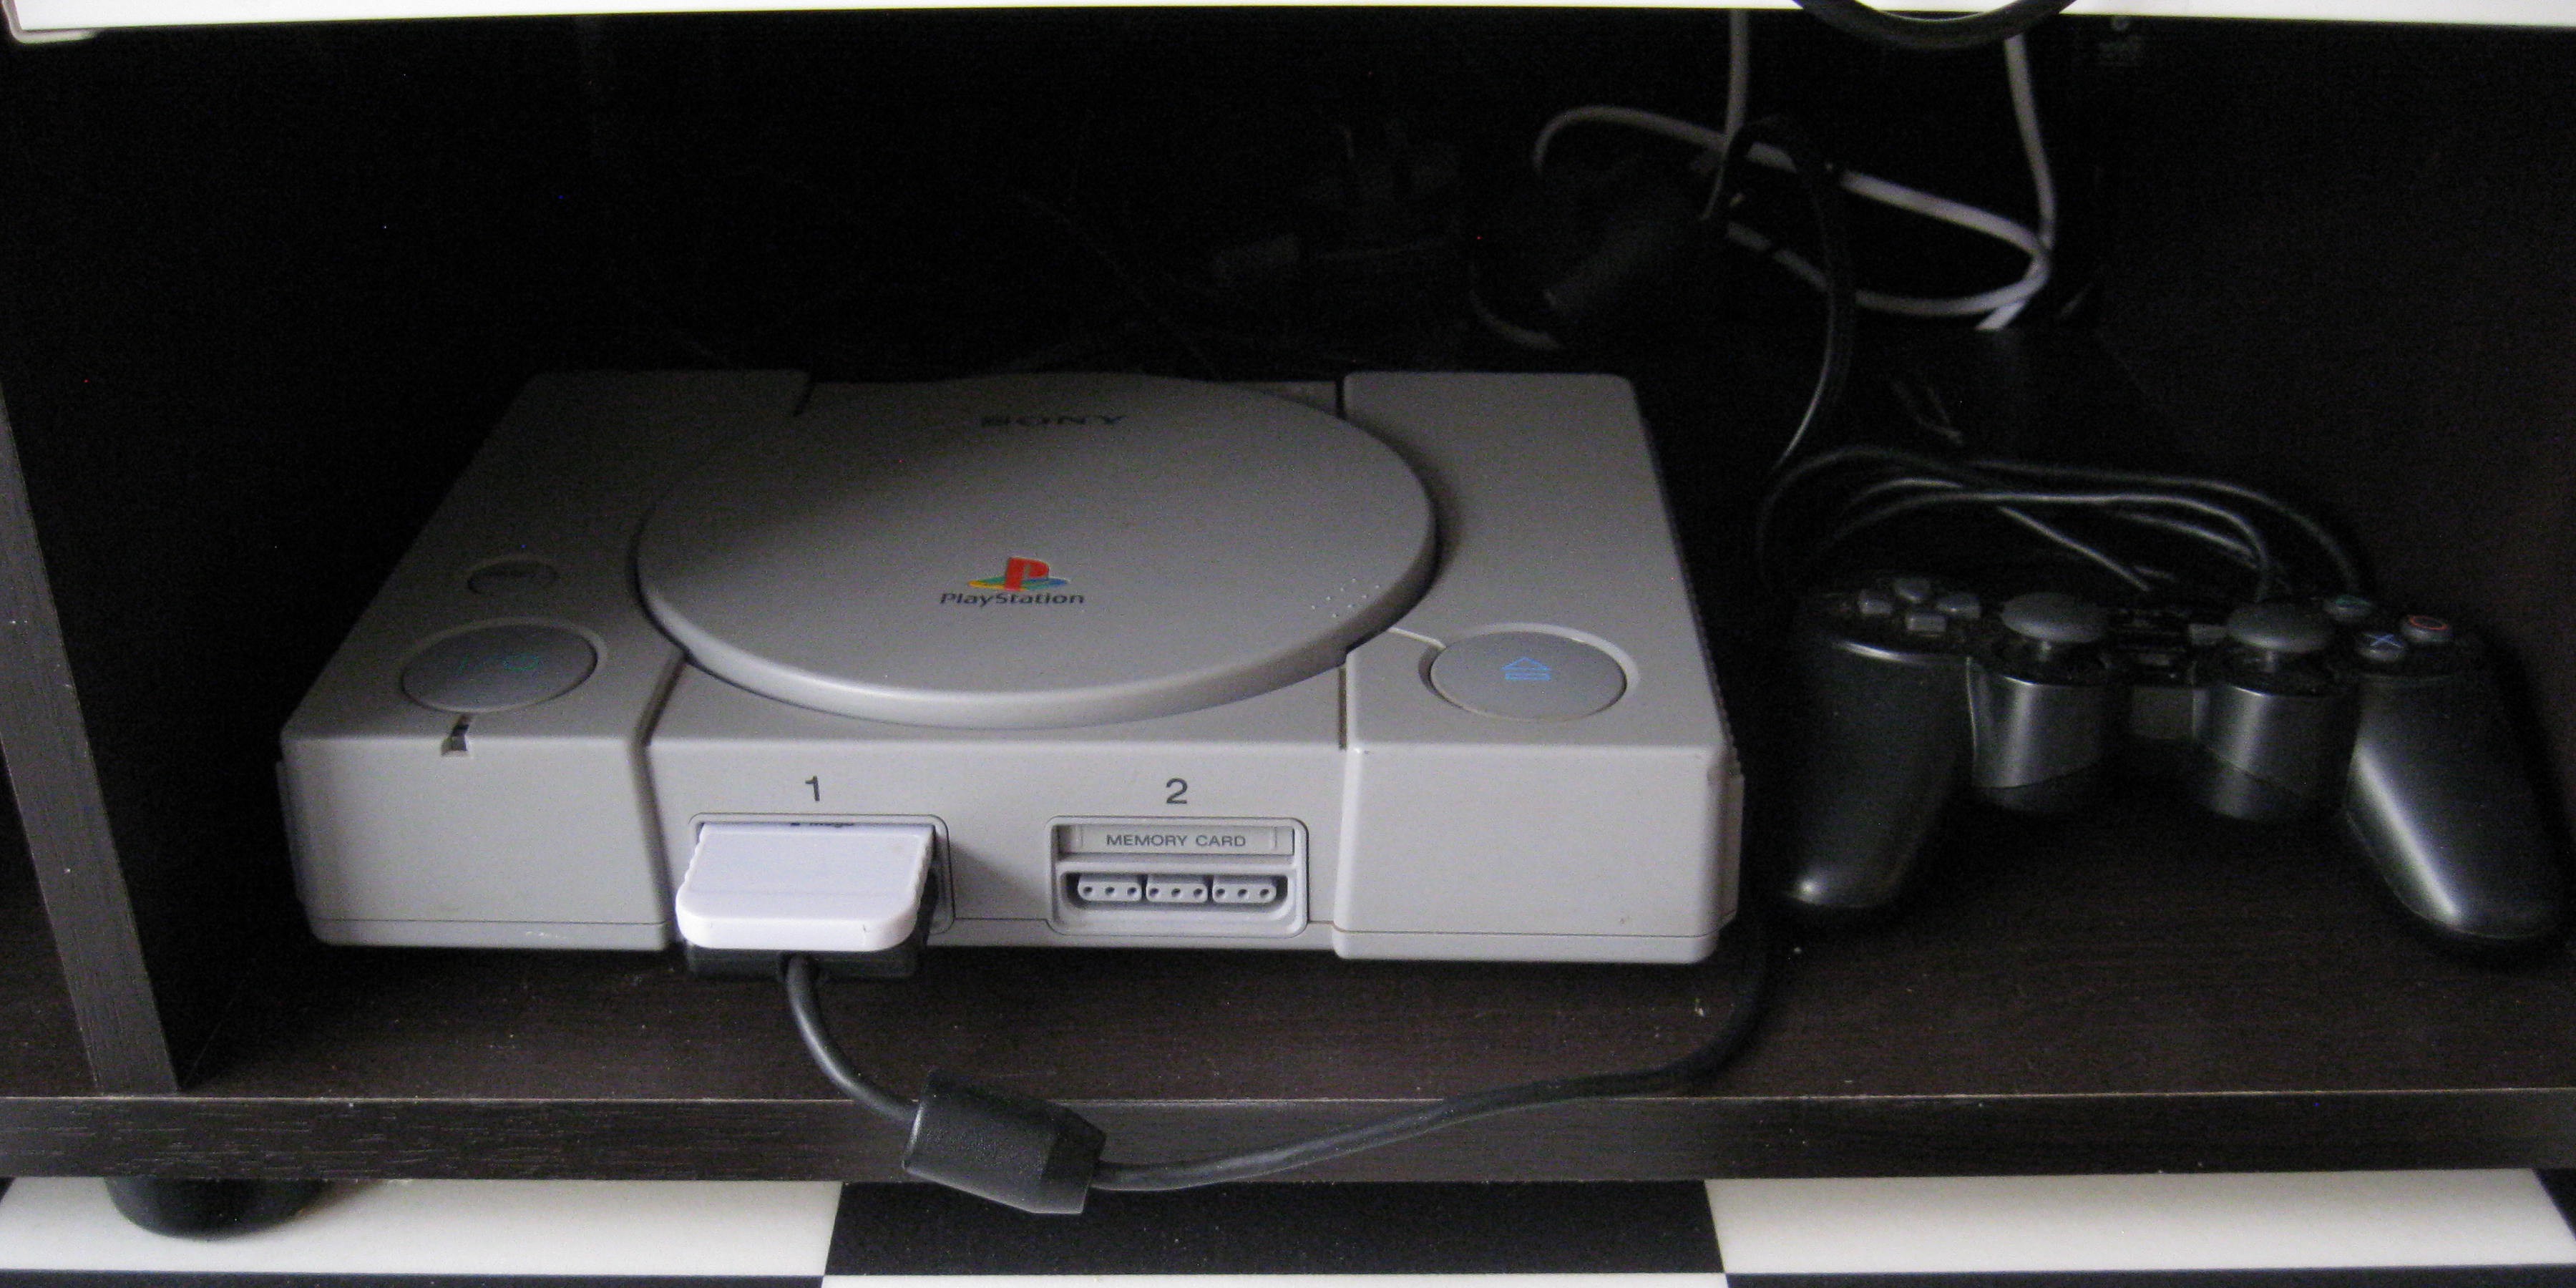 Sony Playstation 1, model number SCPH-7002